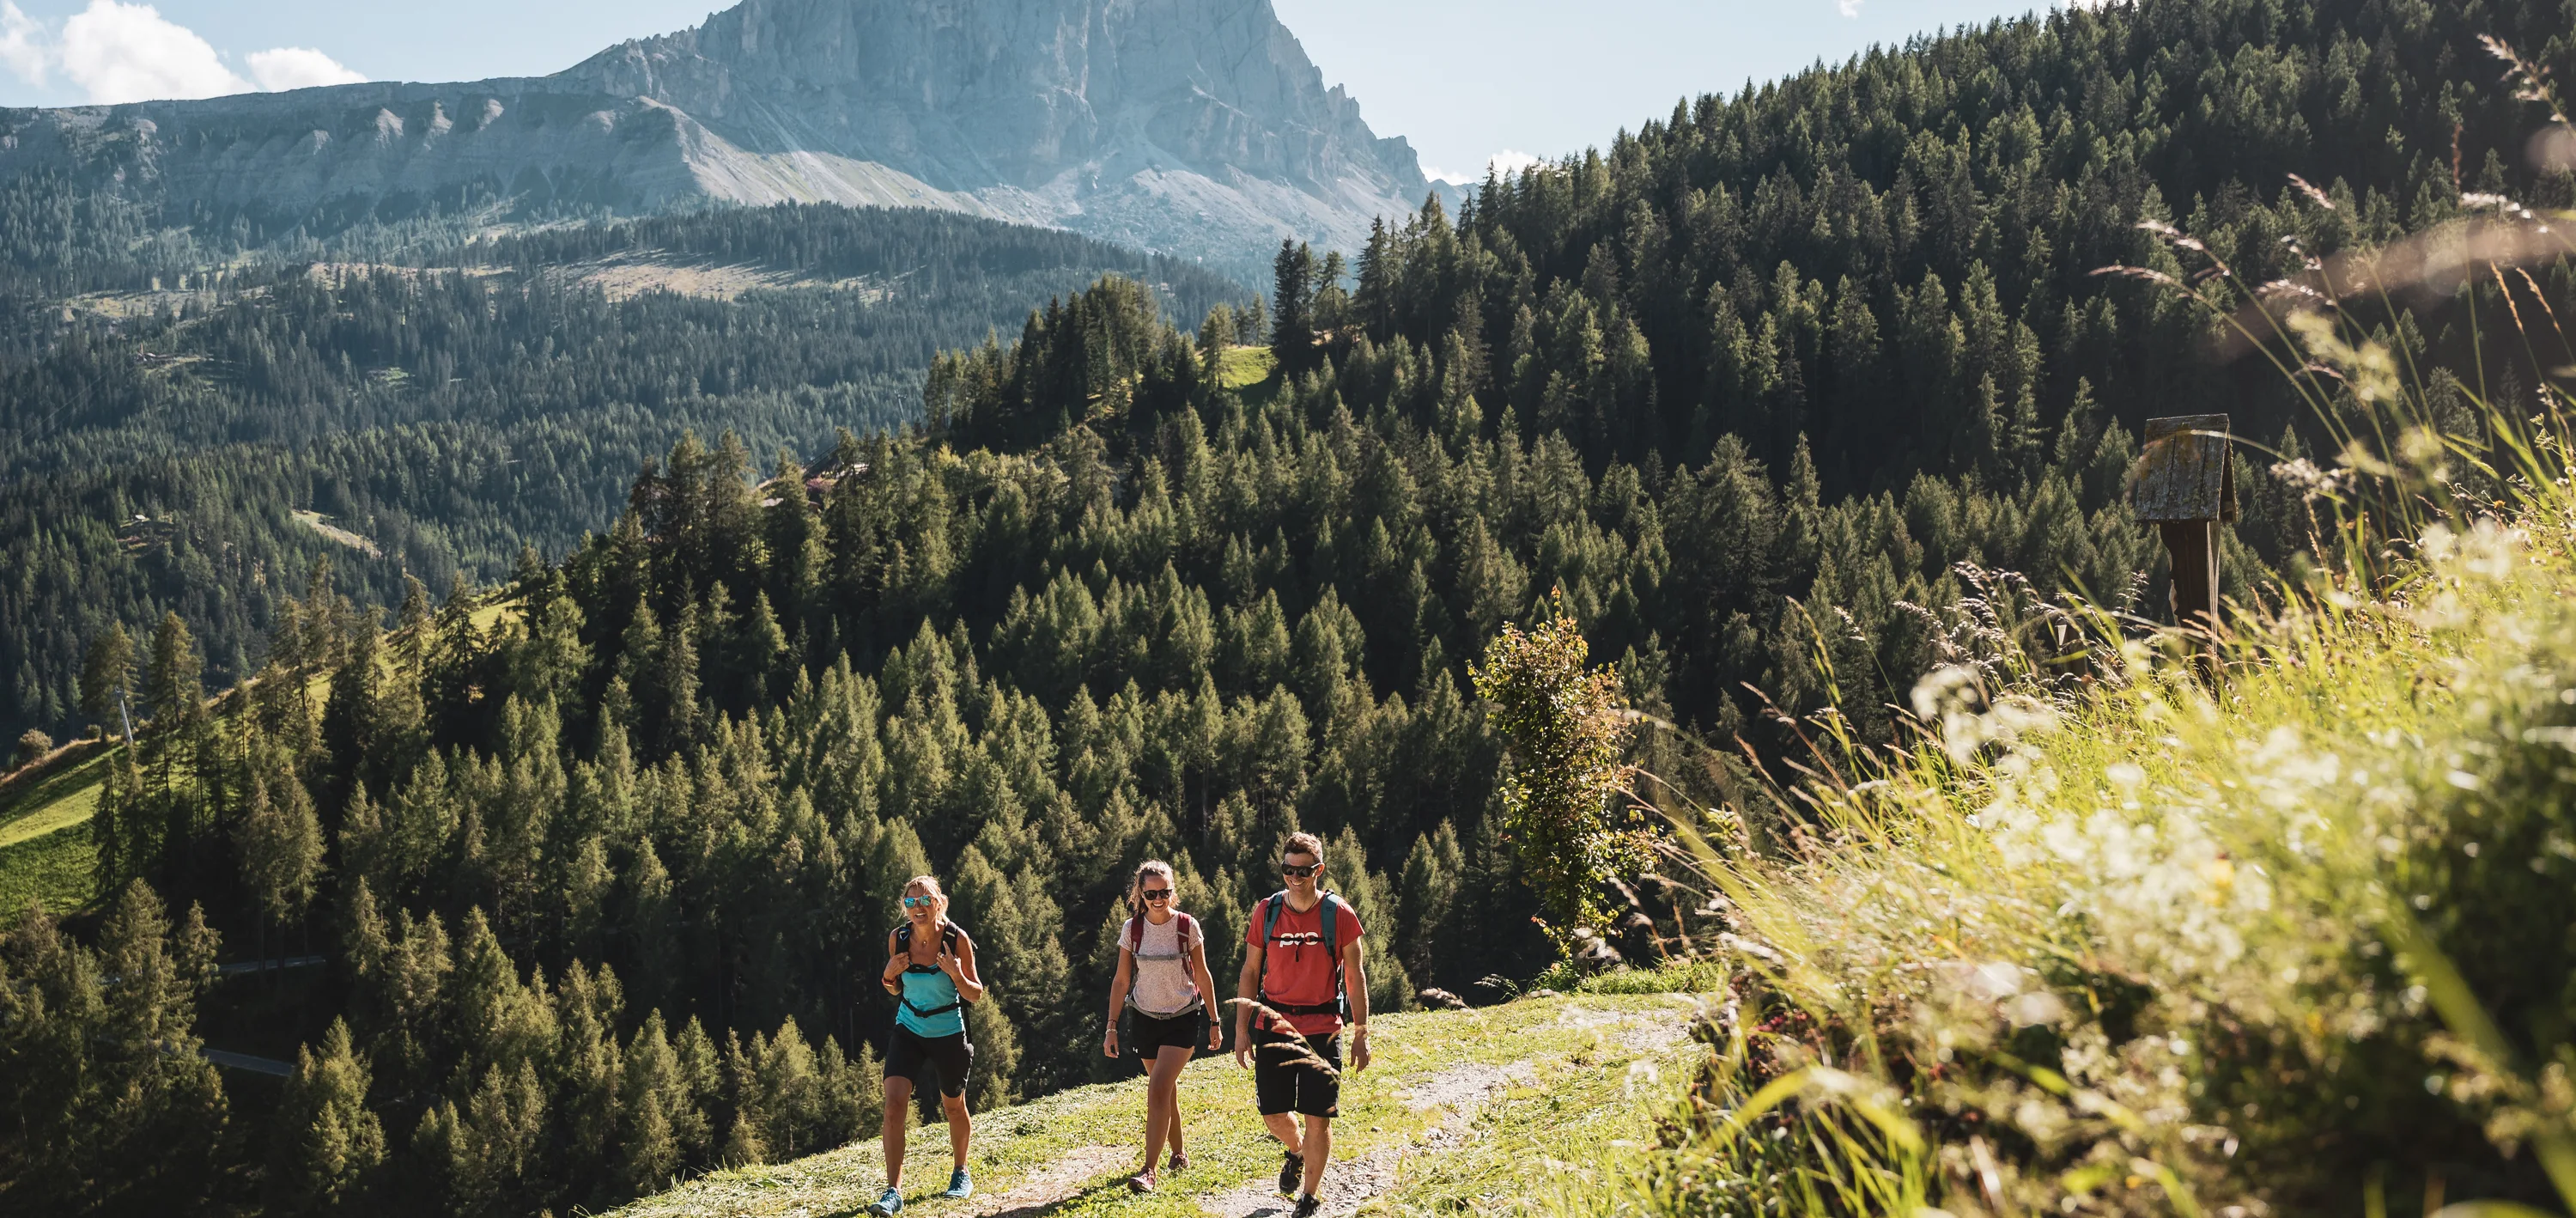 Hiking guide in the Dolomites, hiking on the mountains, hike experience